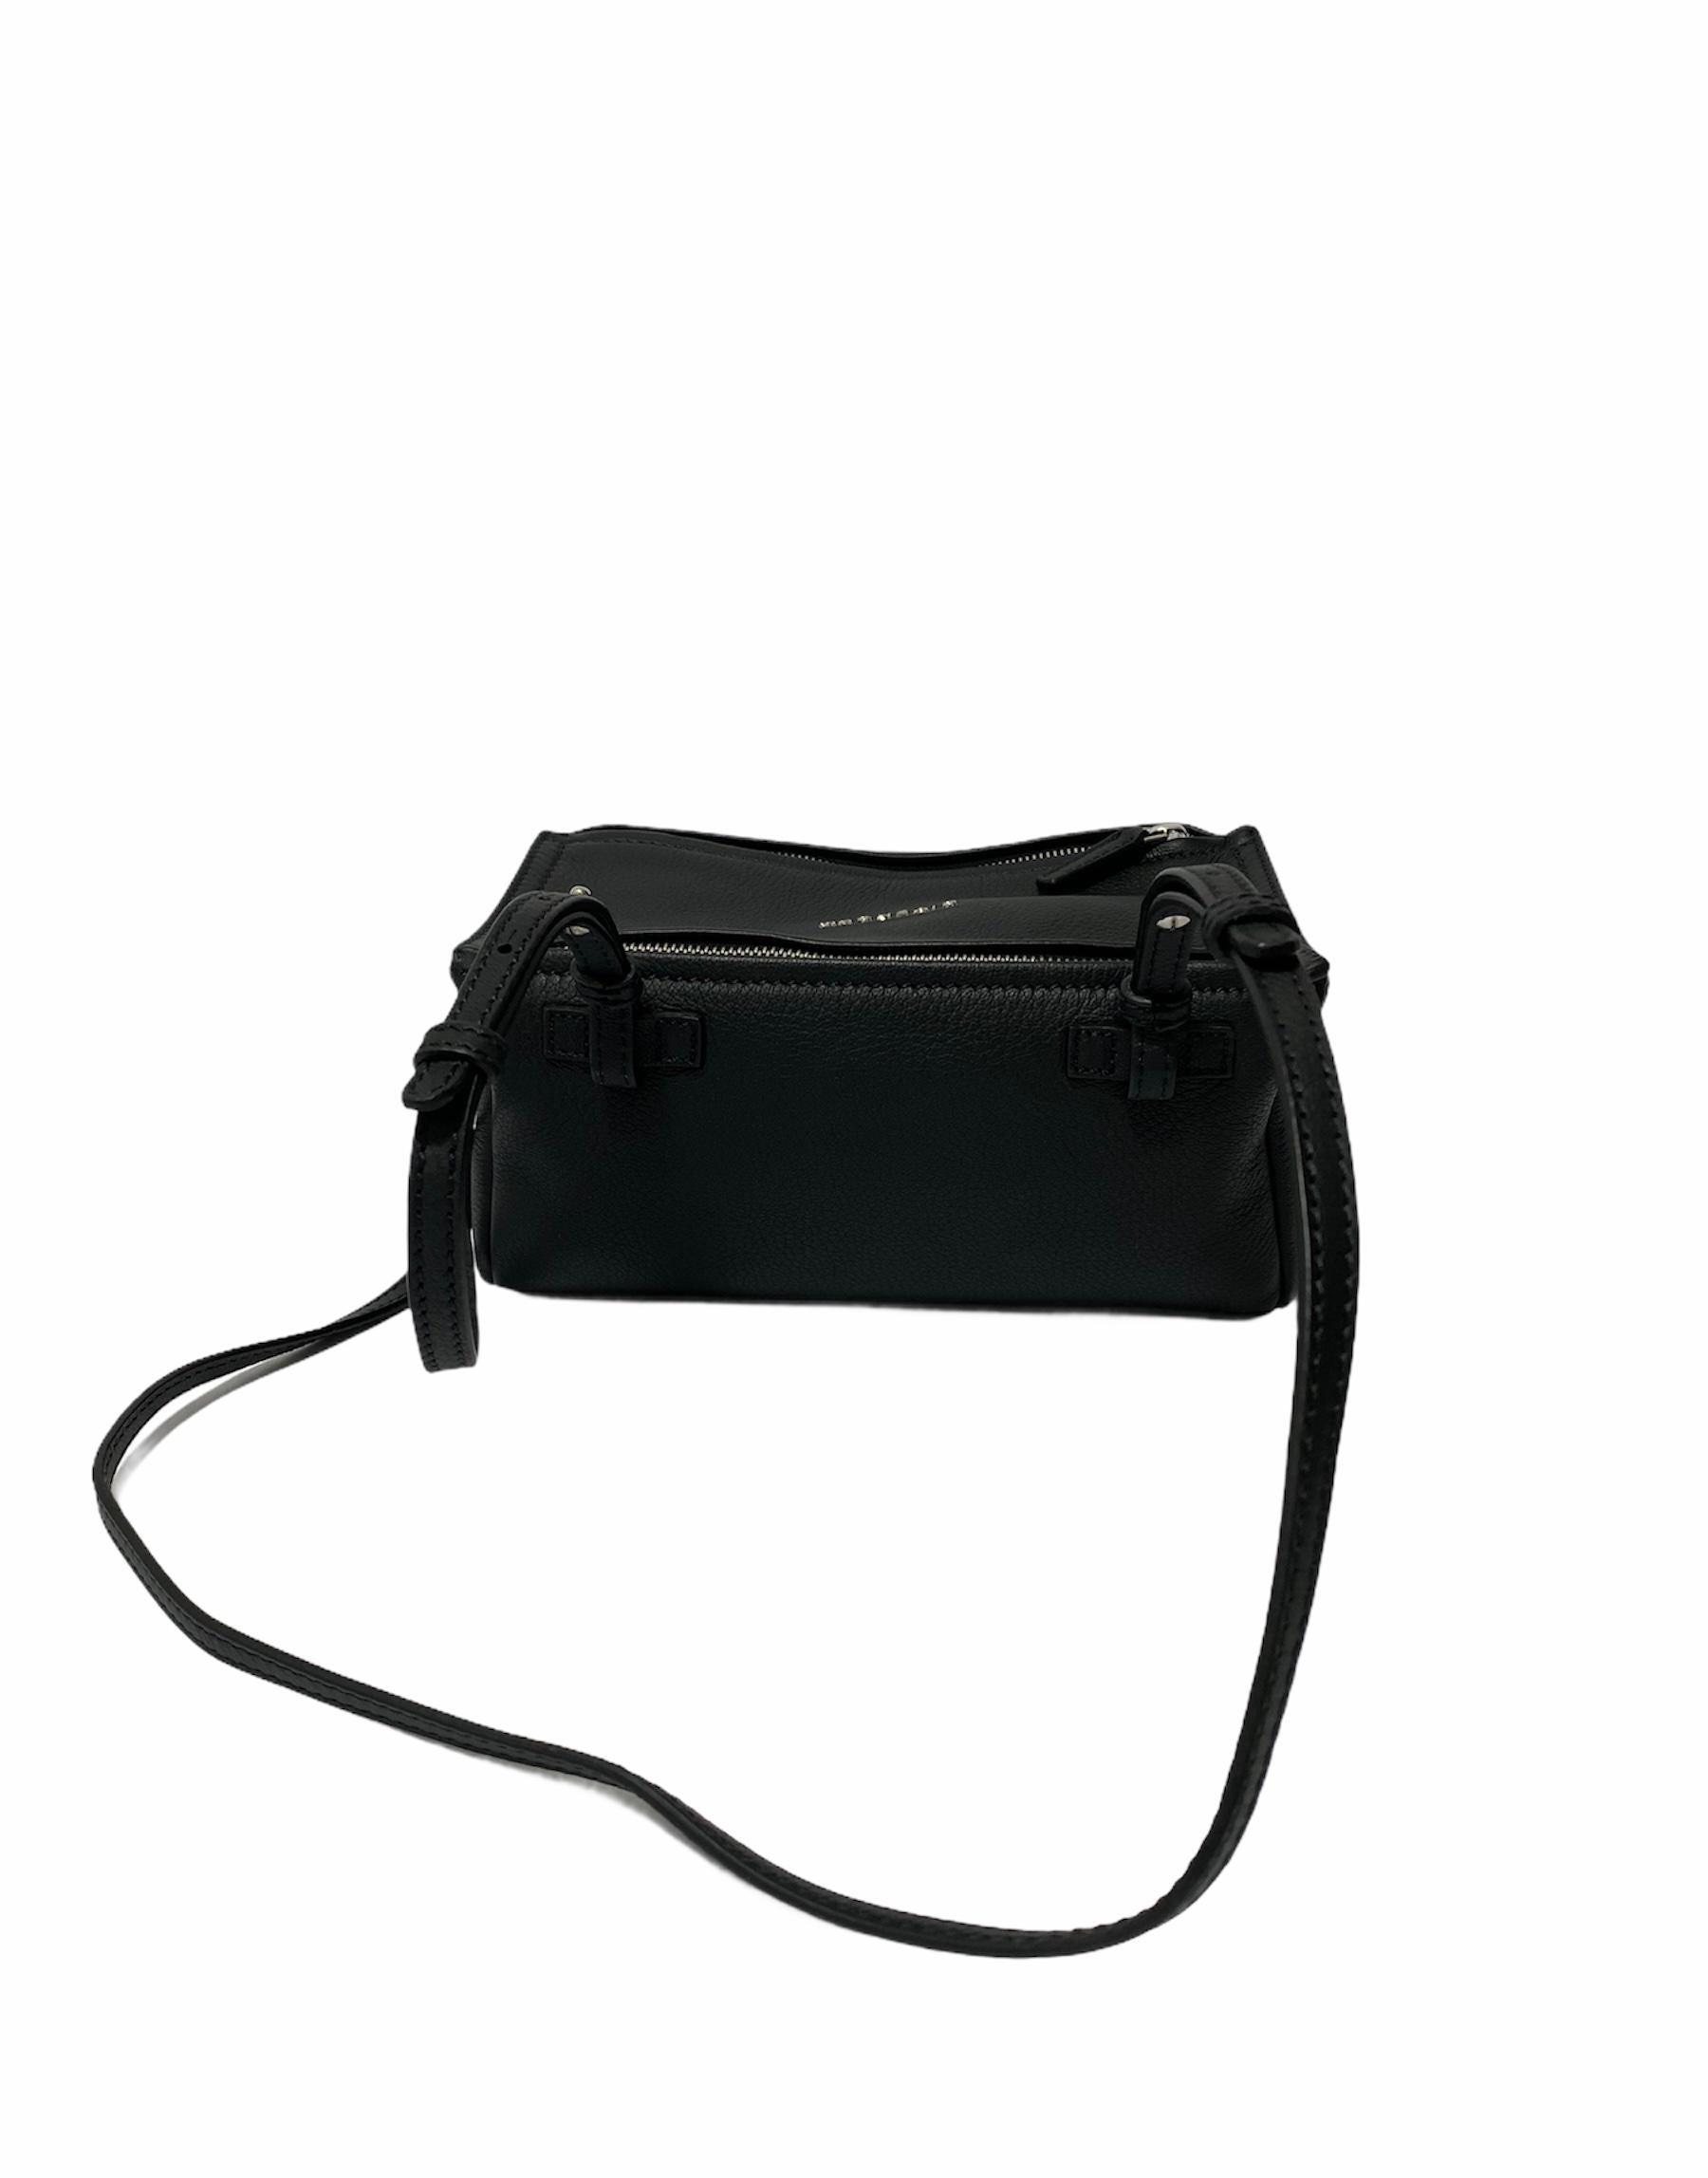 Shoulder bag signed Givenchy, Pandora model made in black leather with silver hardware.

The product is equipped with a zip closure, internally lined in black fabric, roomy for the essentials.

Equipped with an adjustable shoulder strap and an